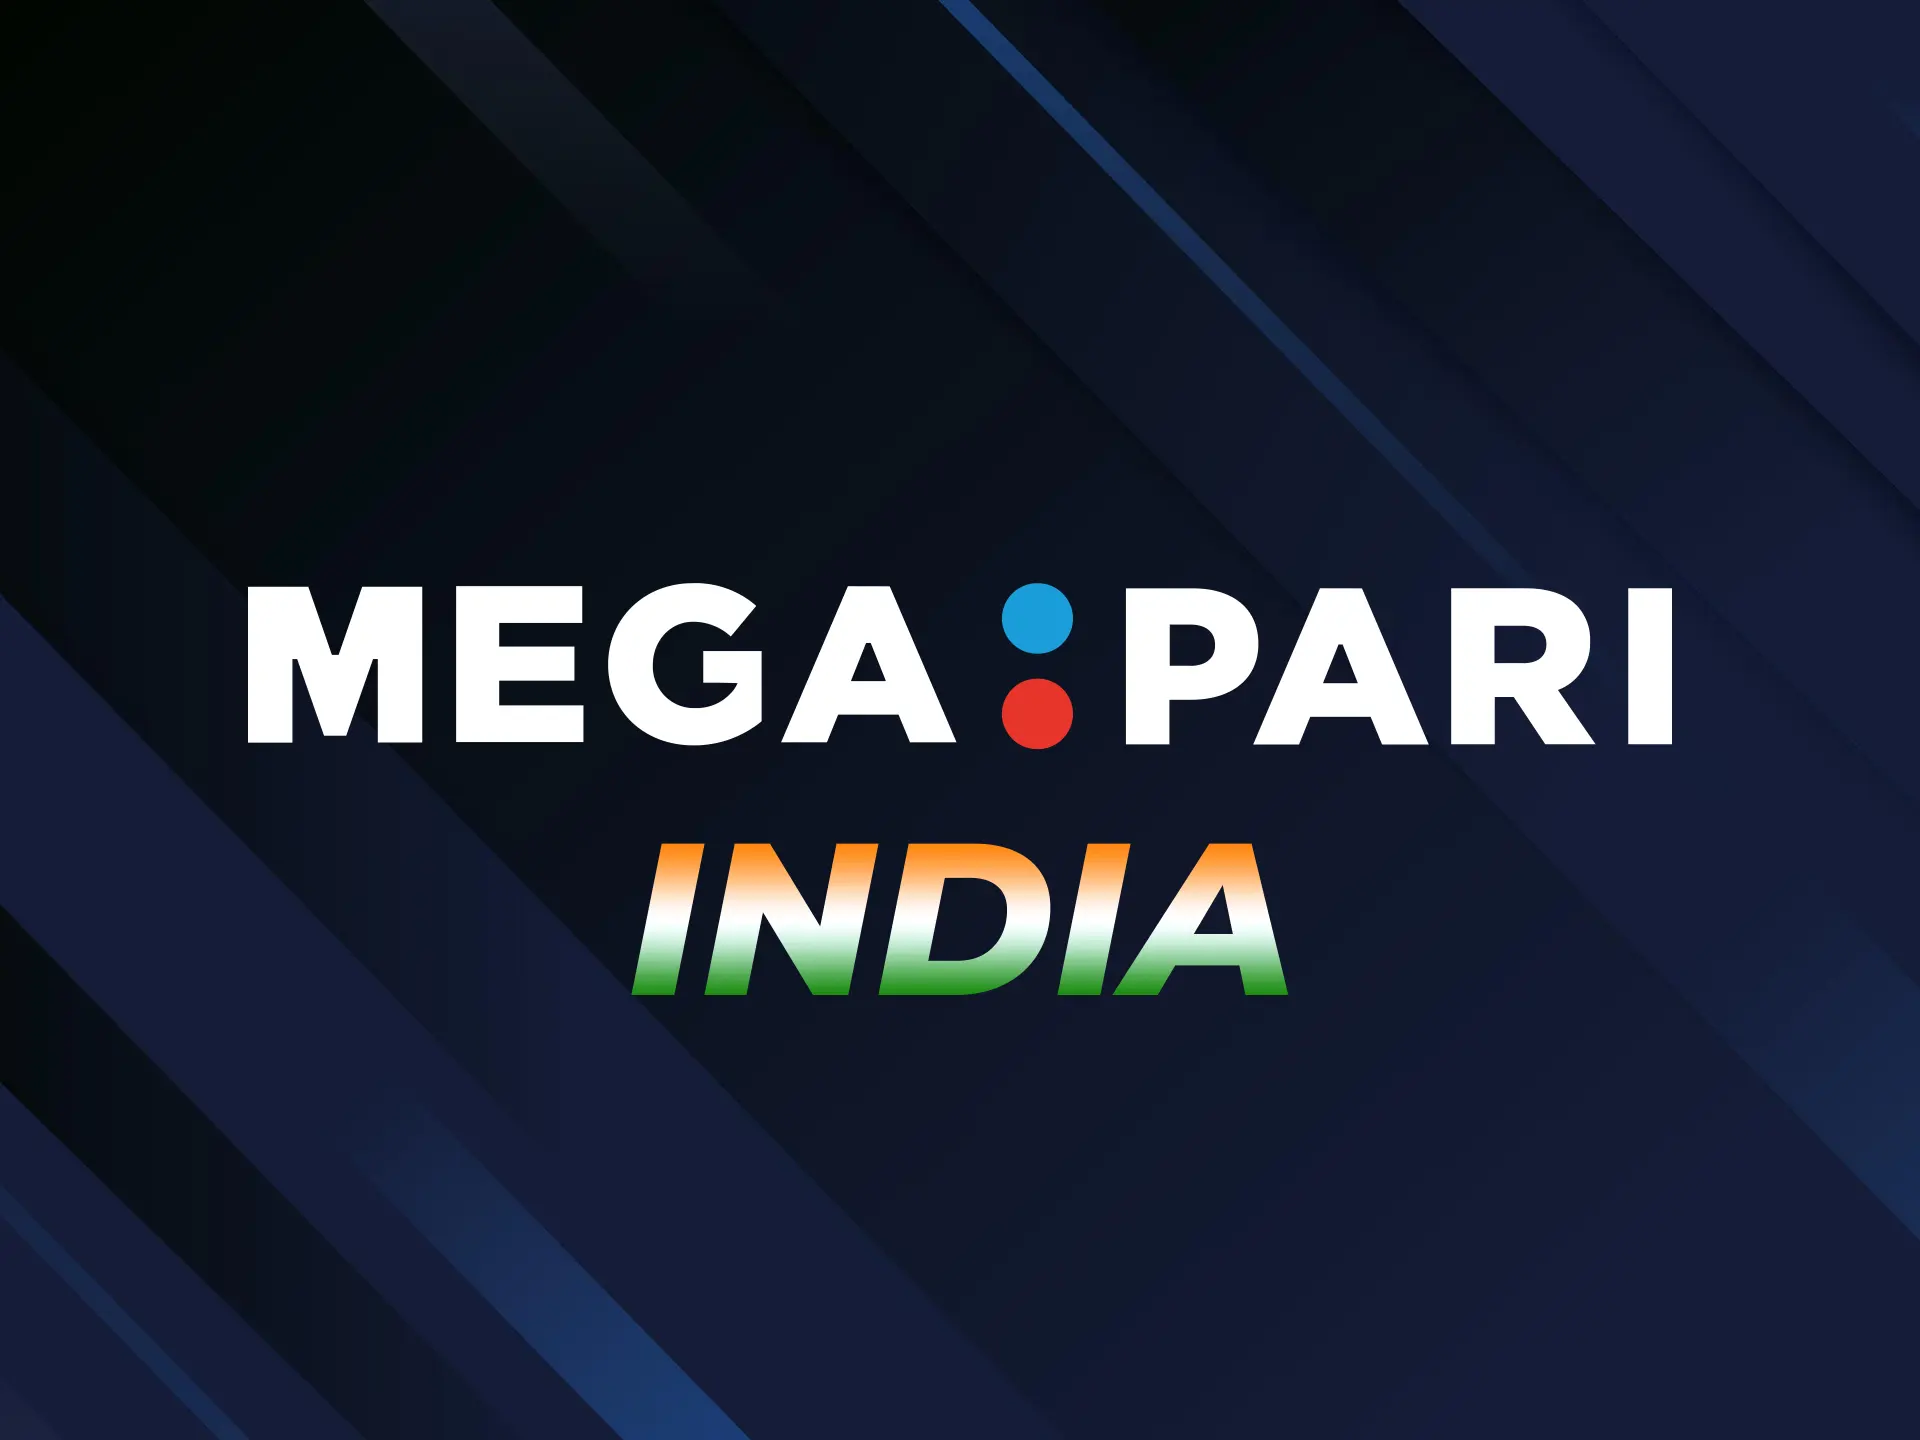 More information for Indian players about Megapari.